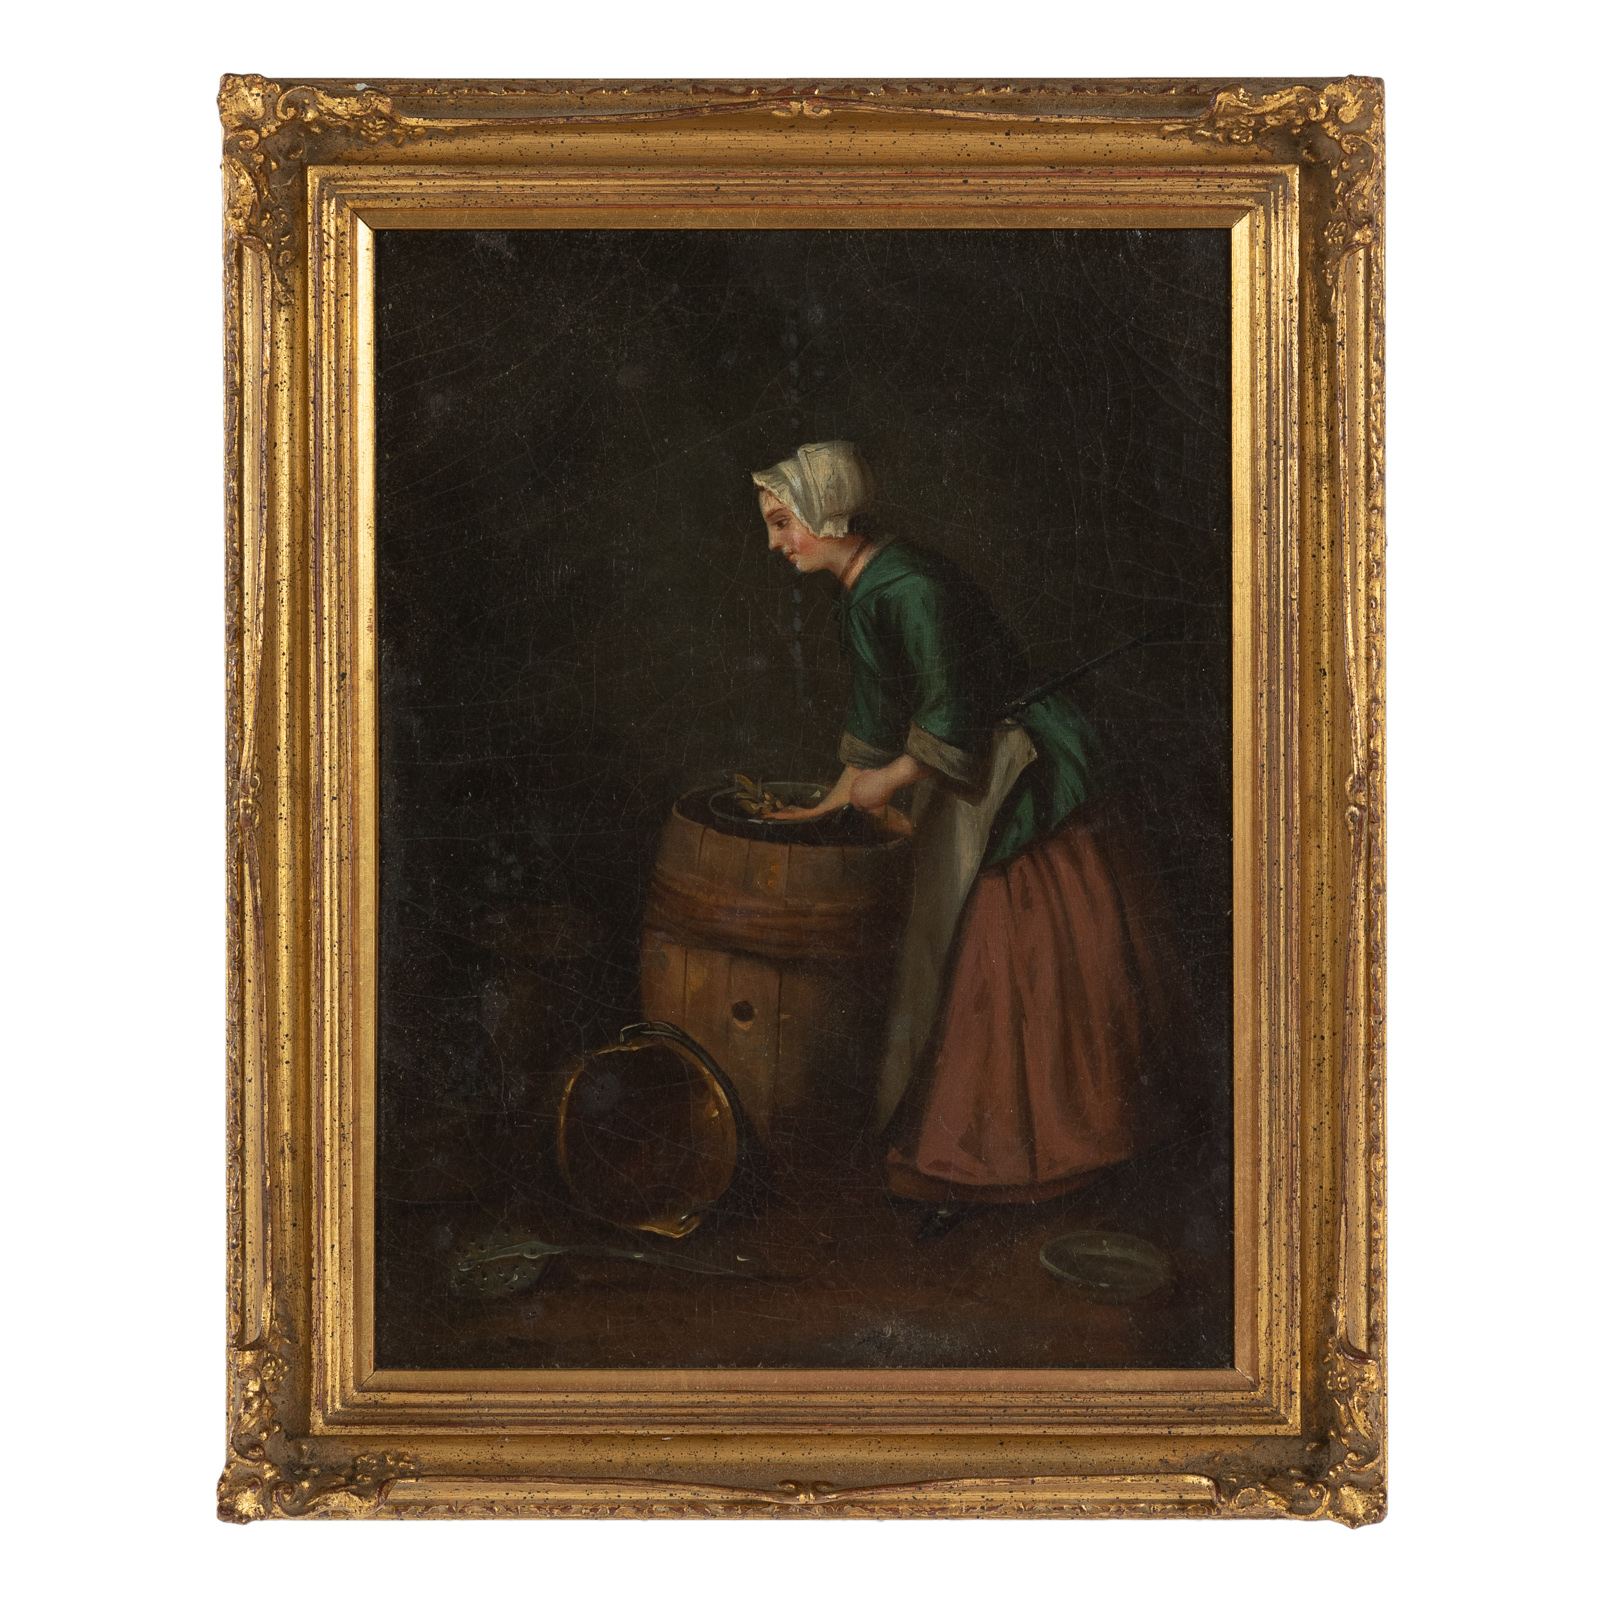 AFTER CHARDIN. SCULLERY MAID, OIL